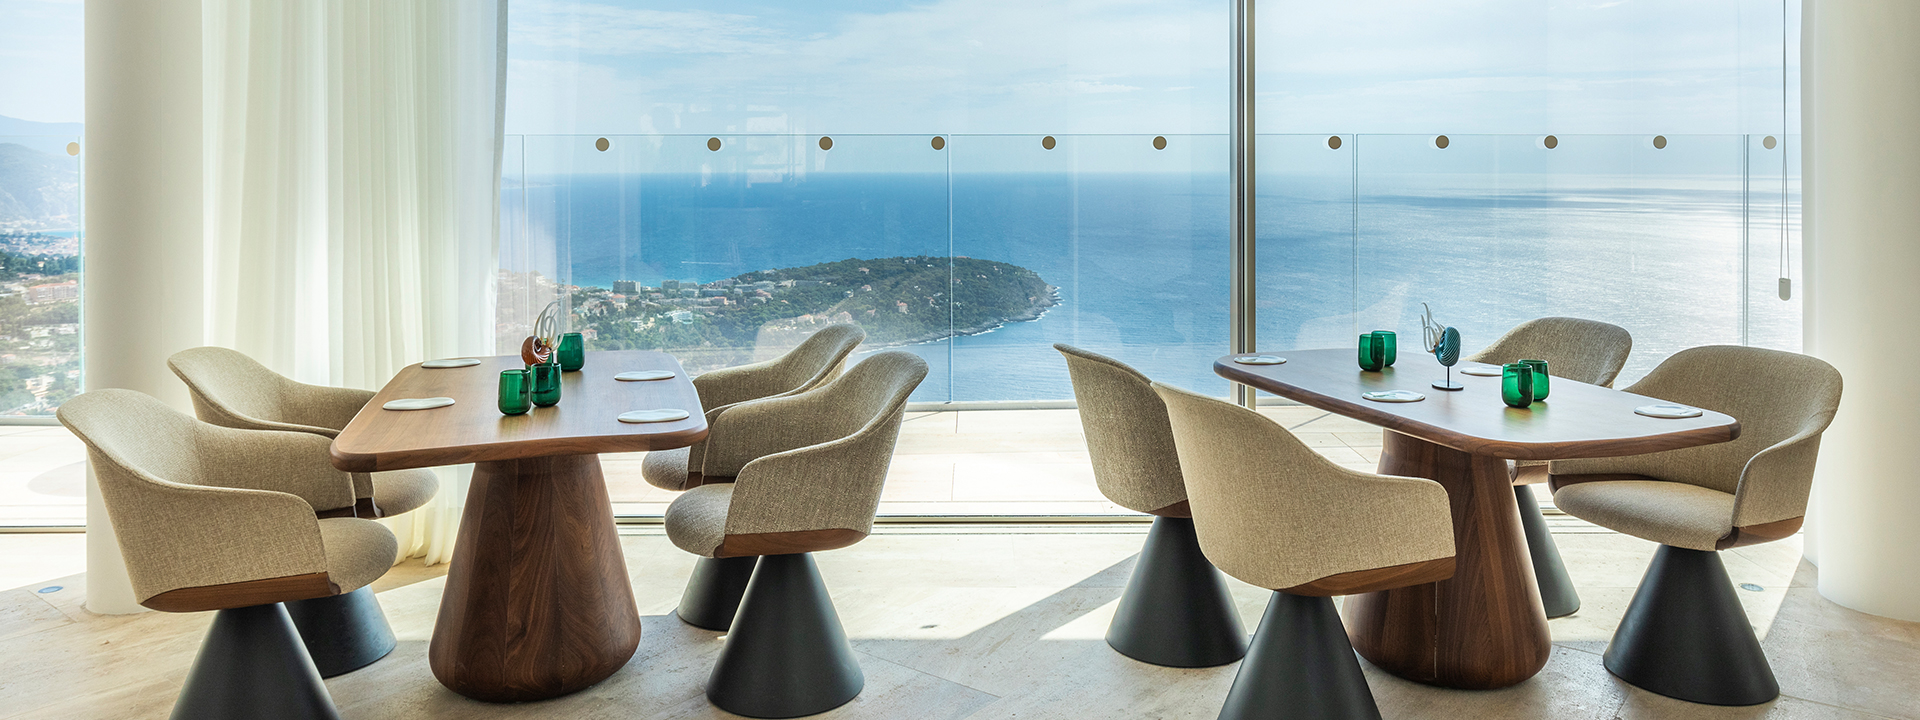 Ceto restaurant at The Maybourbe Riviera - two tables set up in front of the floor to ceiling windows with views onto the sea.